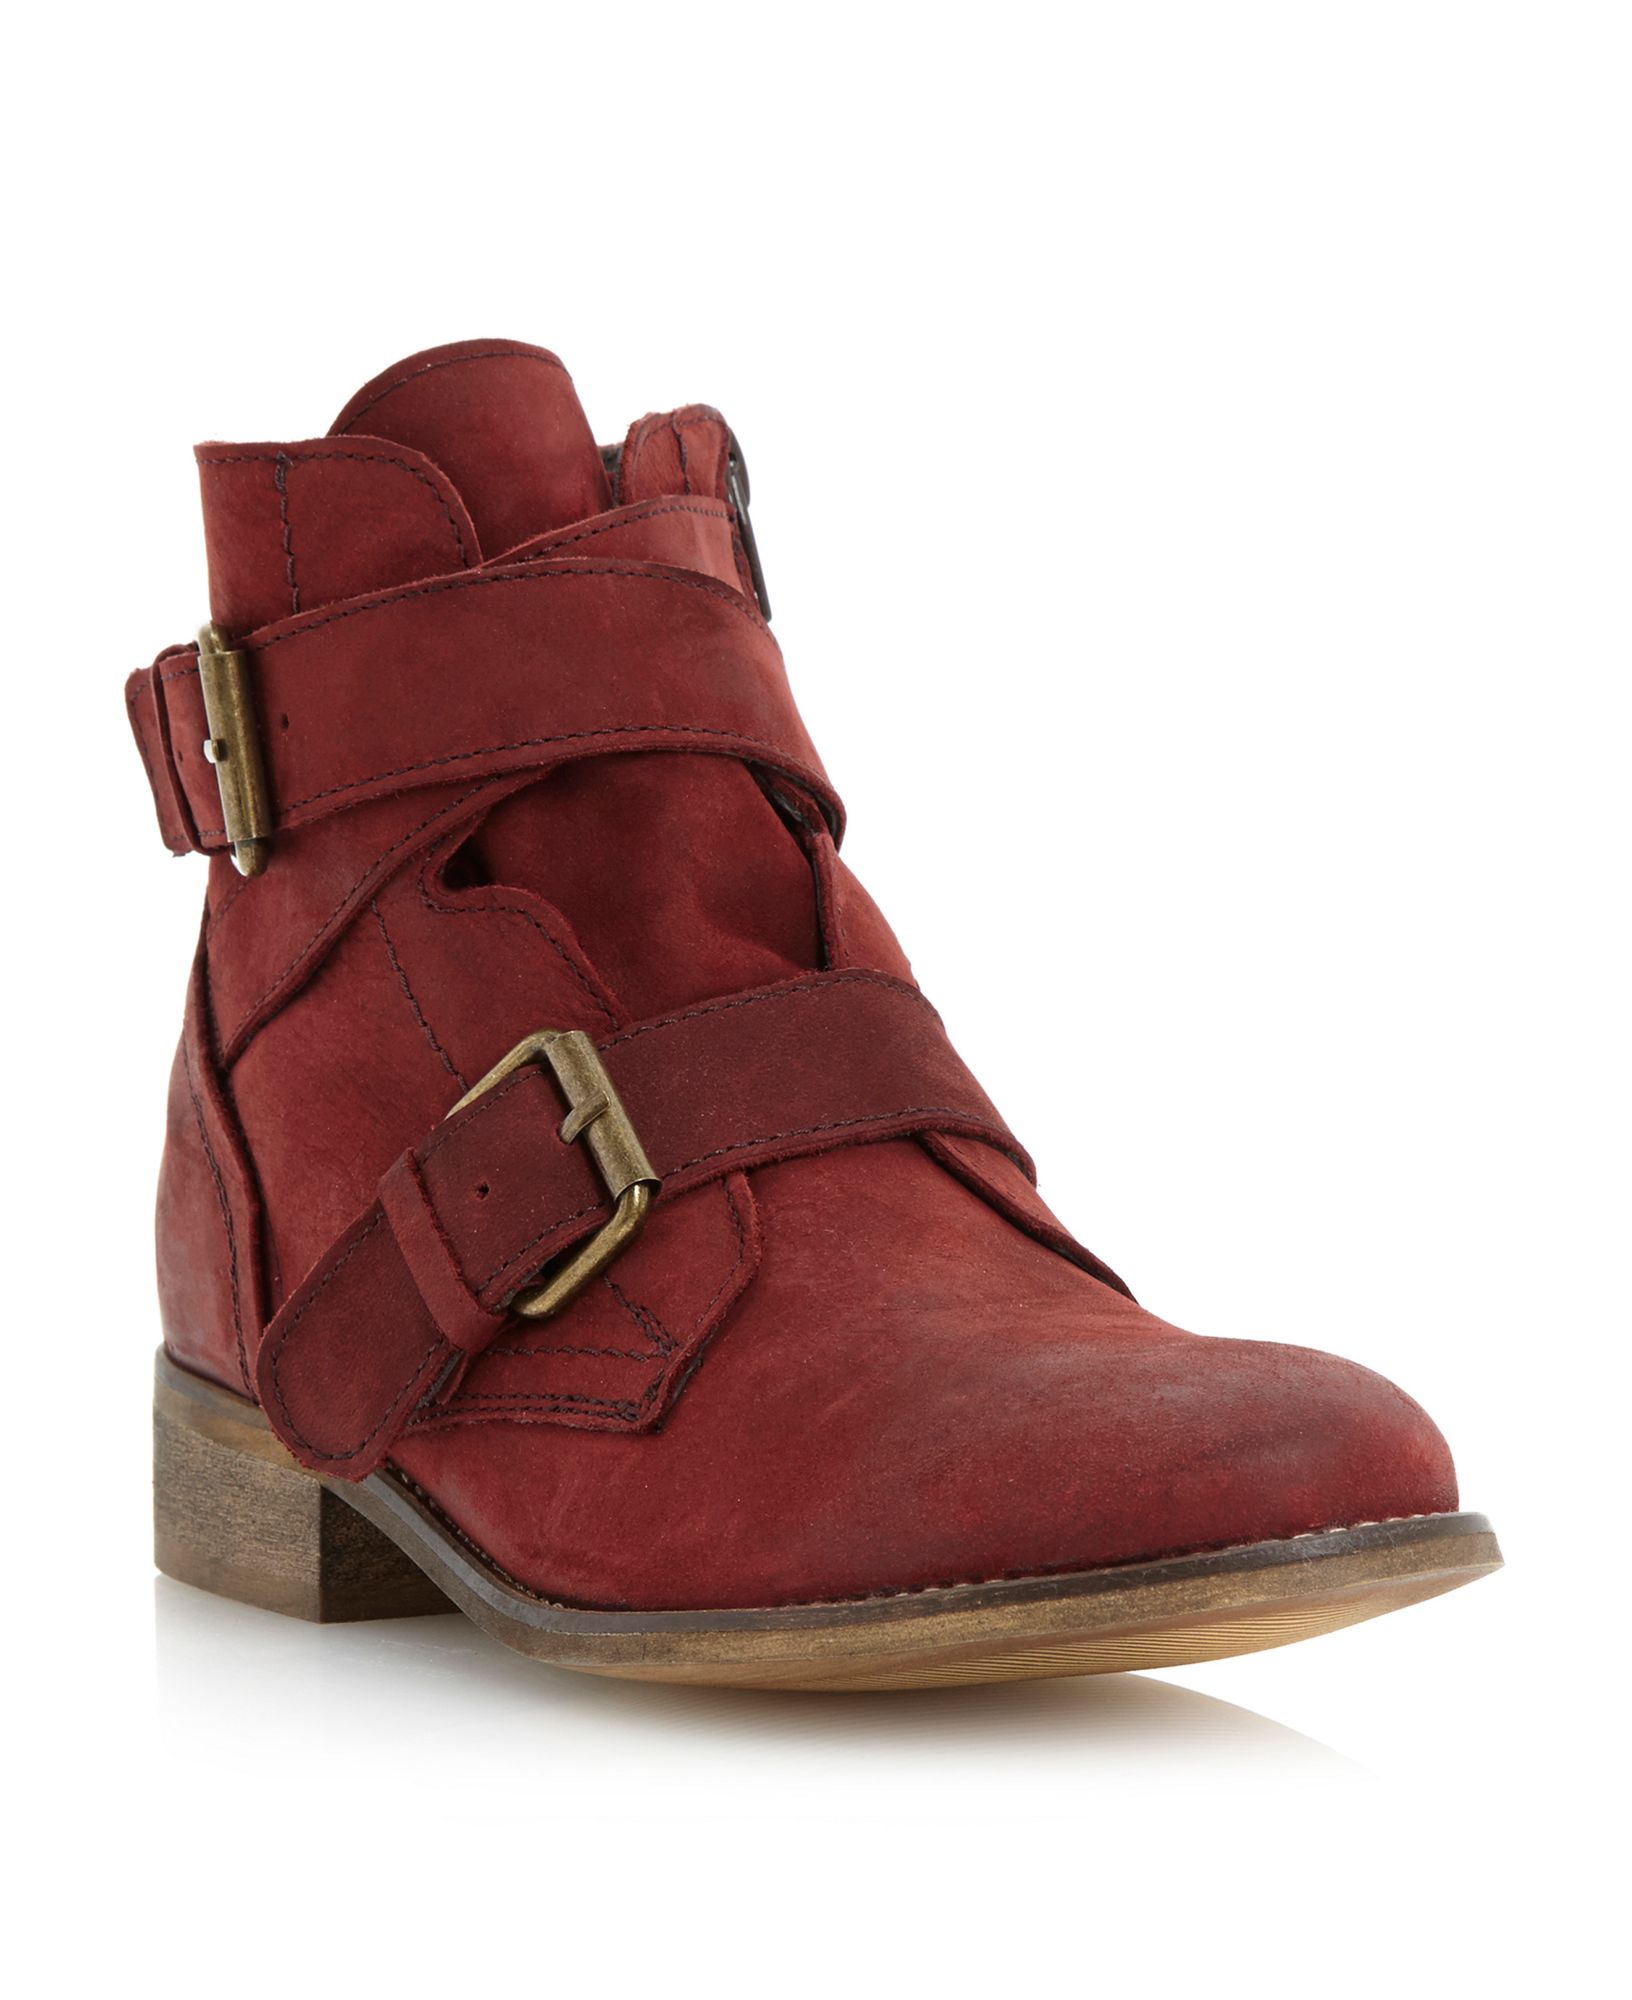 Steve Madden Teritorydouble Buckle Strap Ankle Boots in